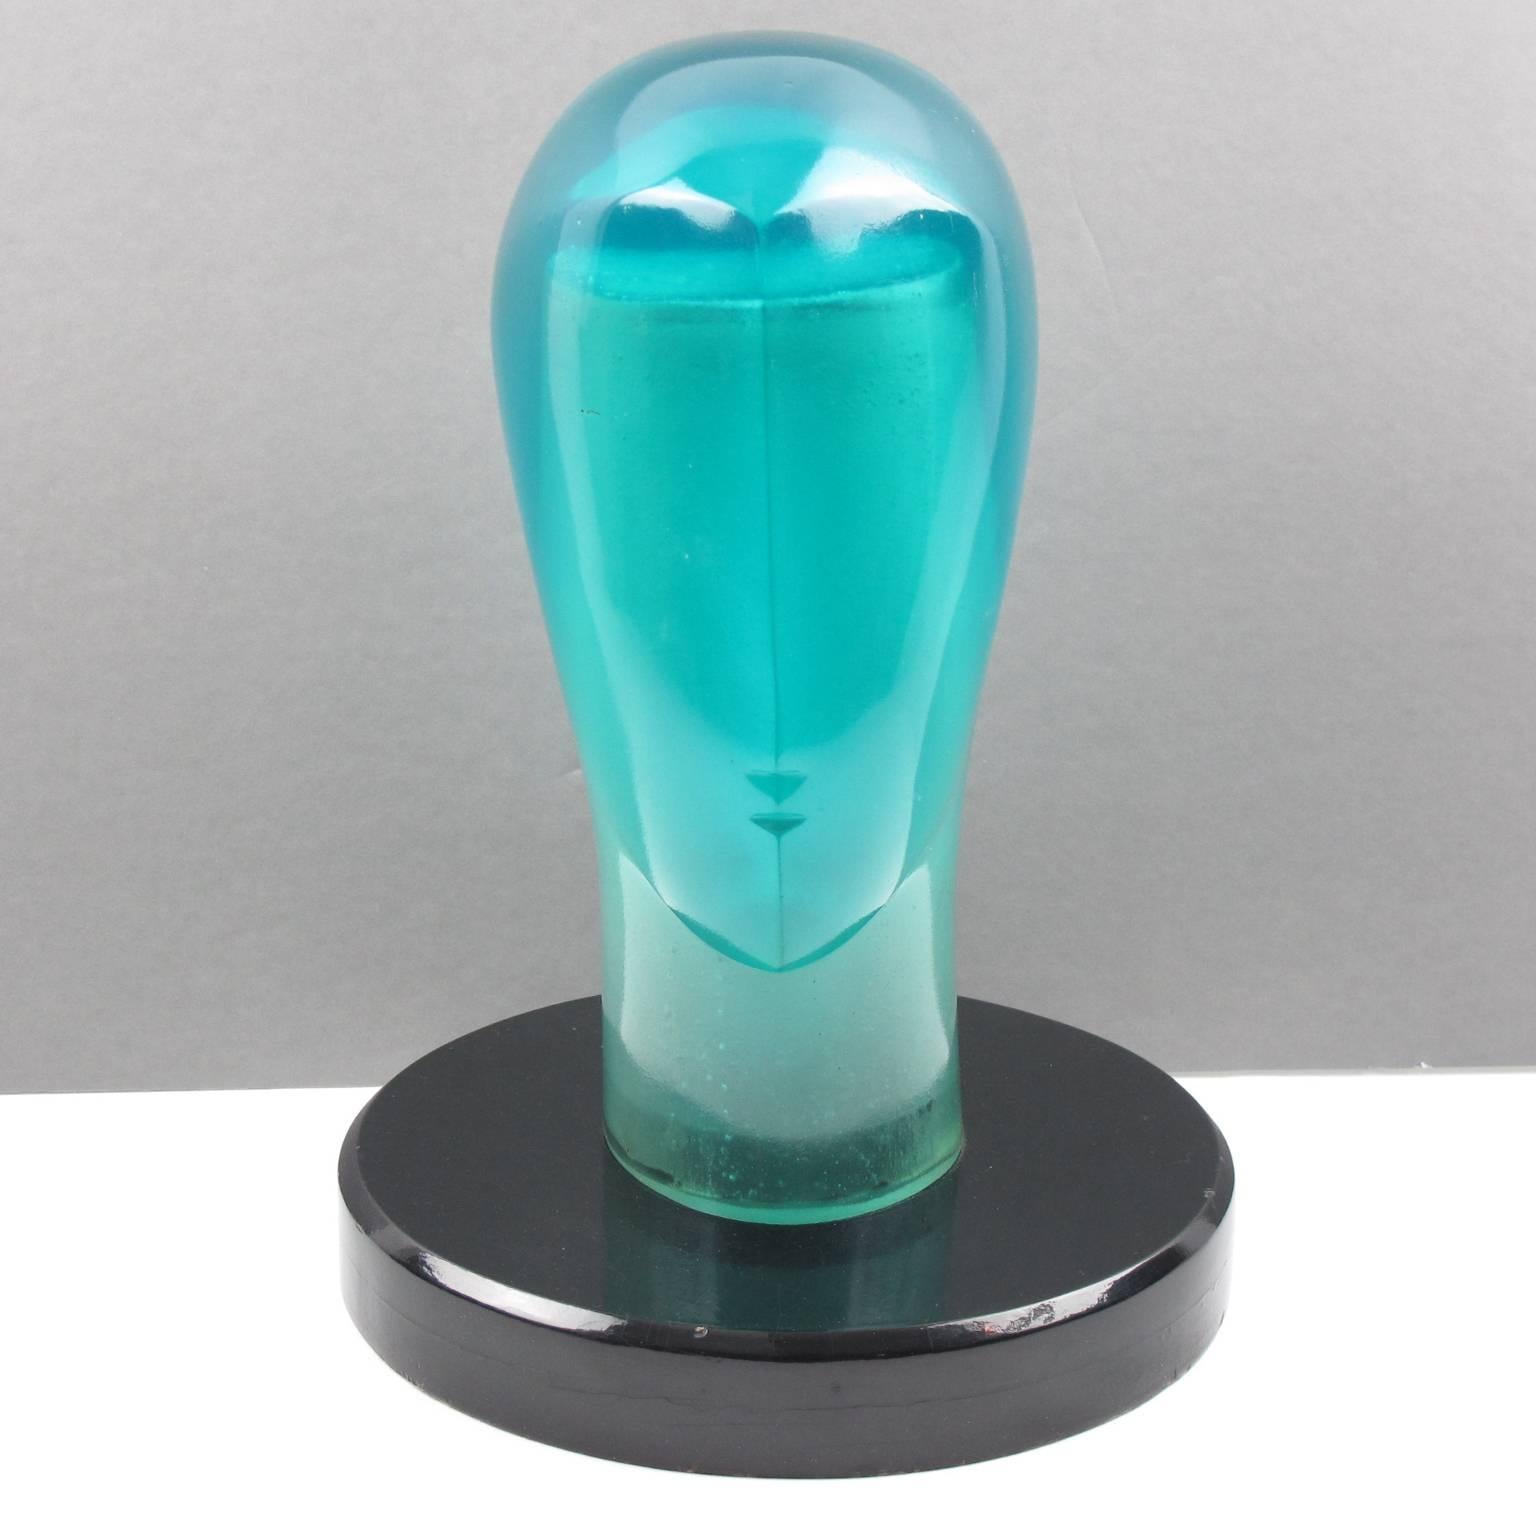 Spectacular huge resin head model or sculpture, probably a store display stand, circa 1970s. Unique aqua turquoise blue all translucent color with Minimalist almost Art Deco design carved face. Solid wood base with black lacquered finish. Note, the